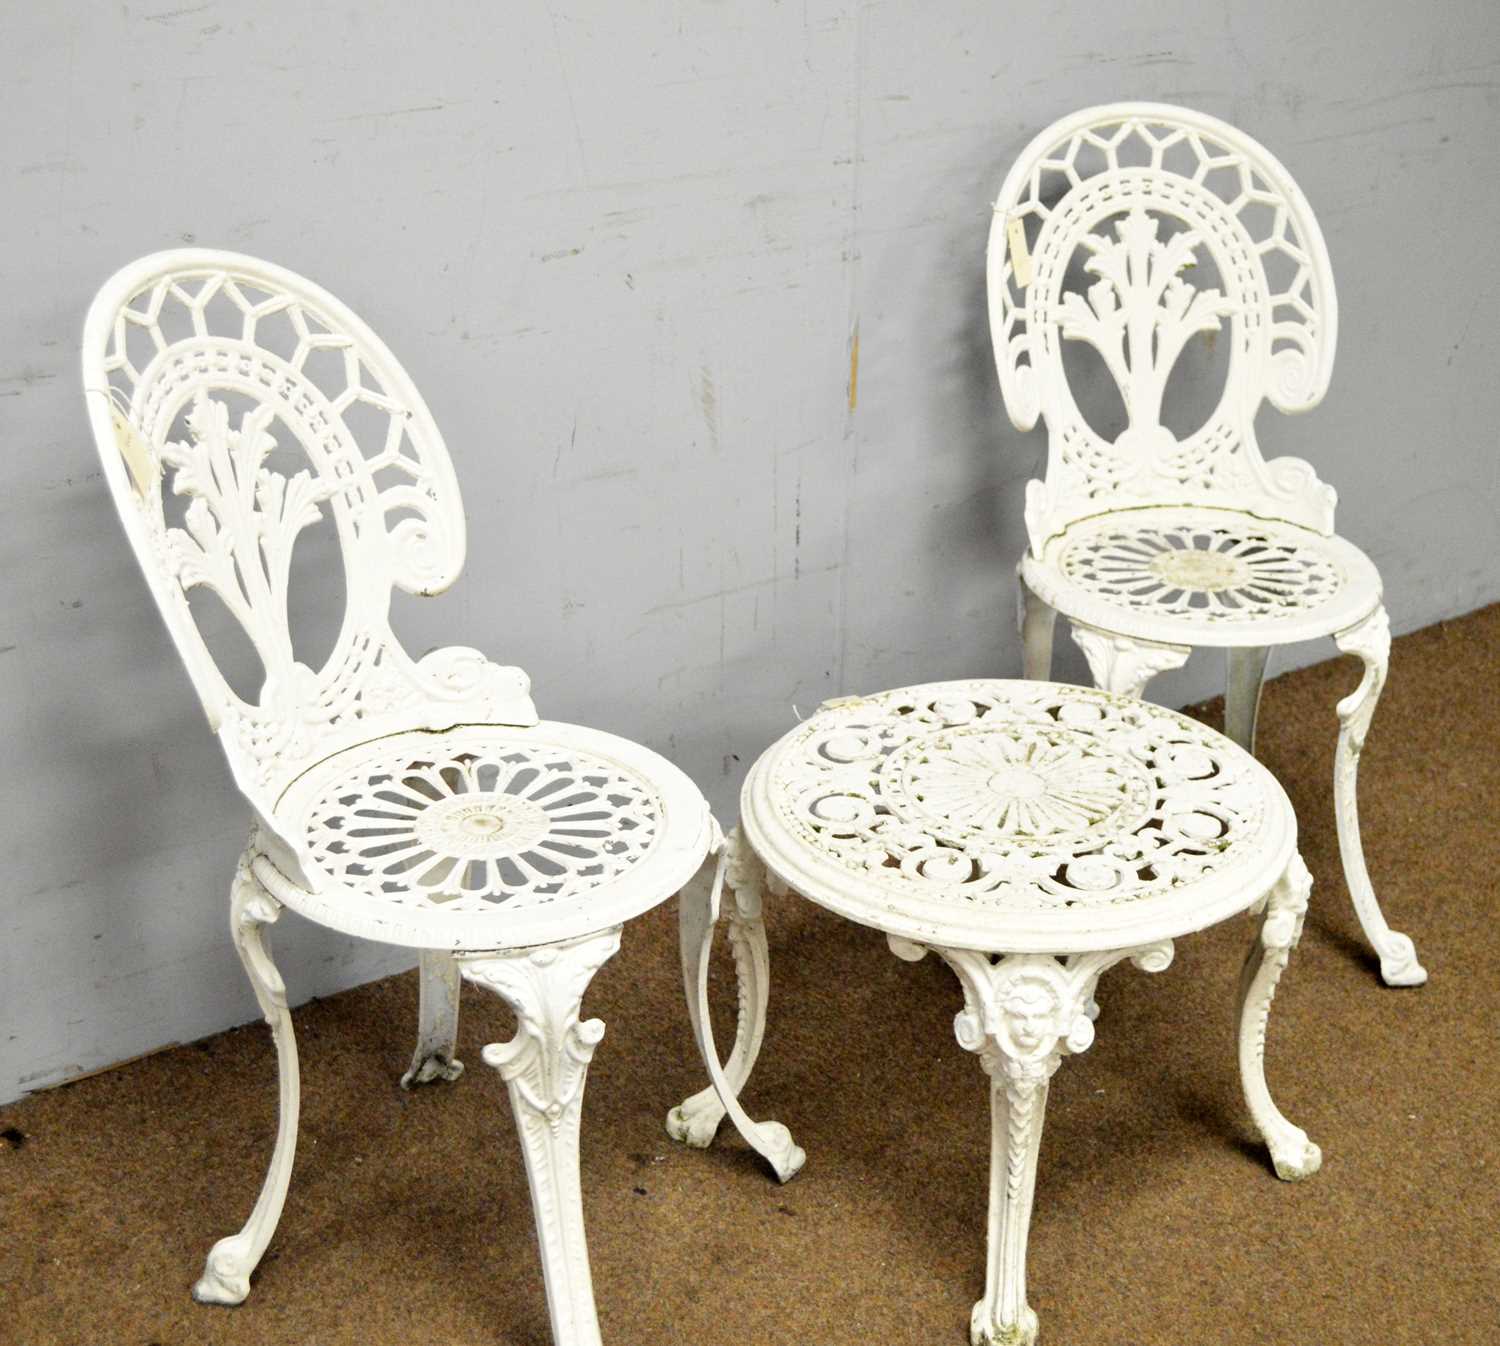 A white-painted cast iron garden table and chairs. - Image 2 of 4